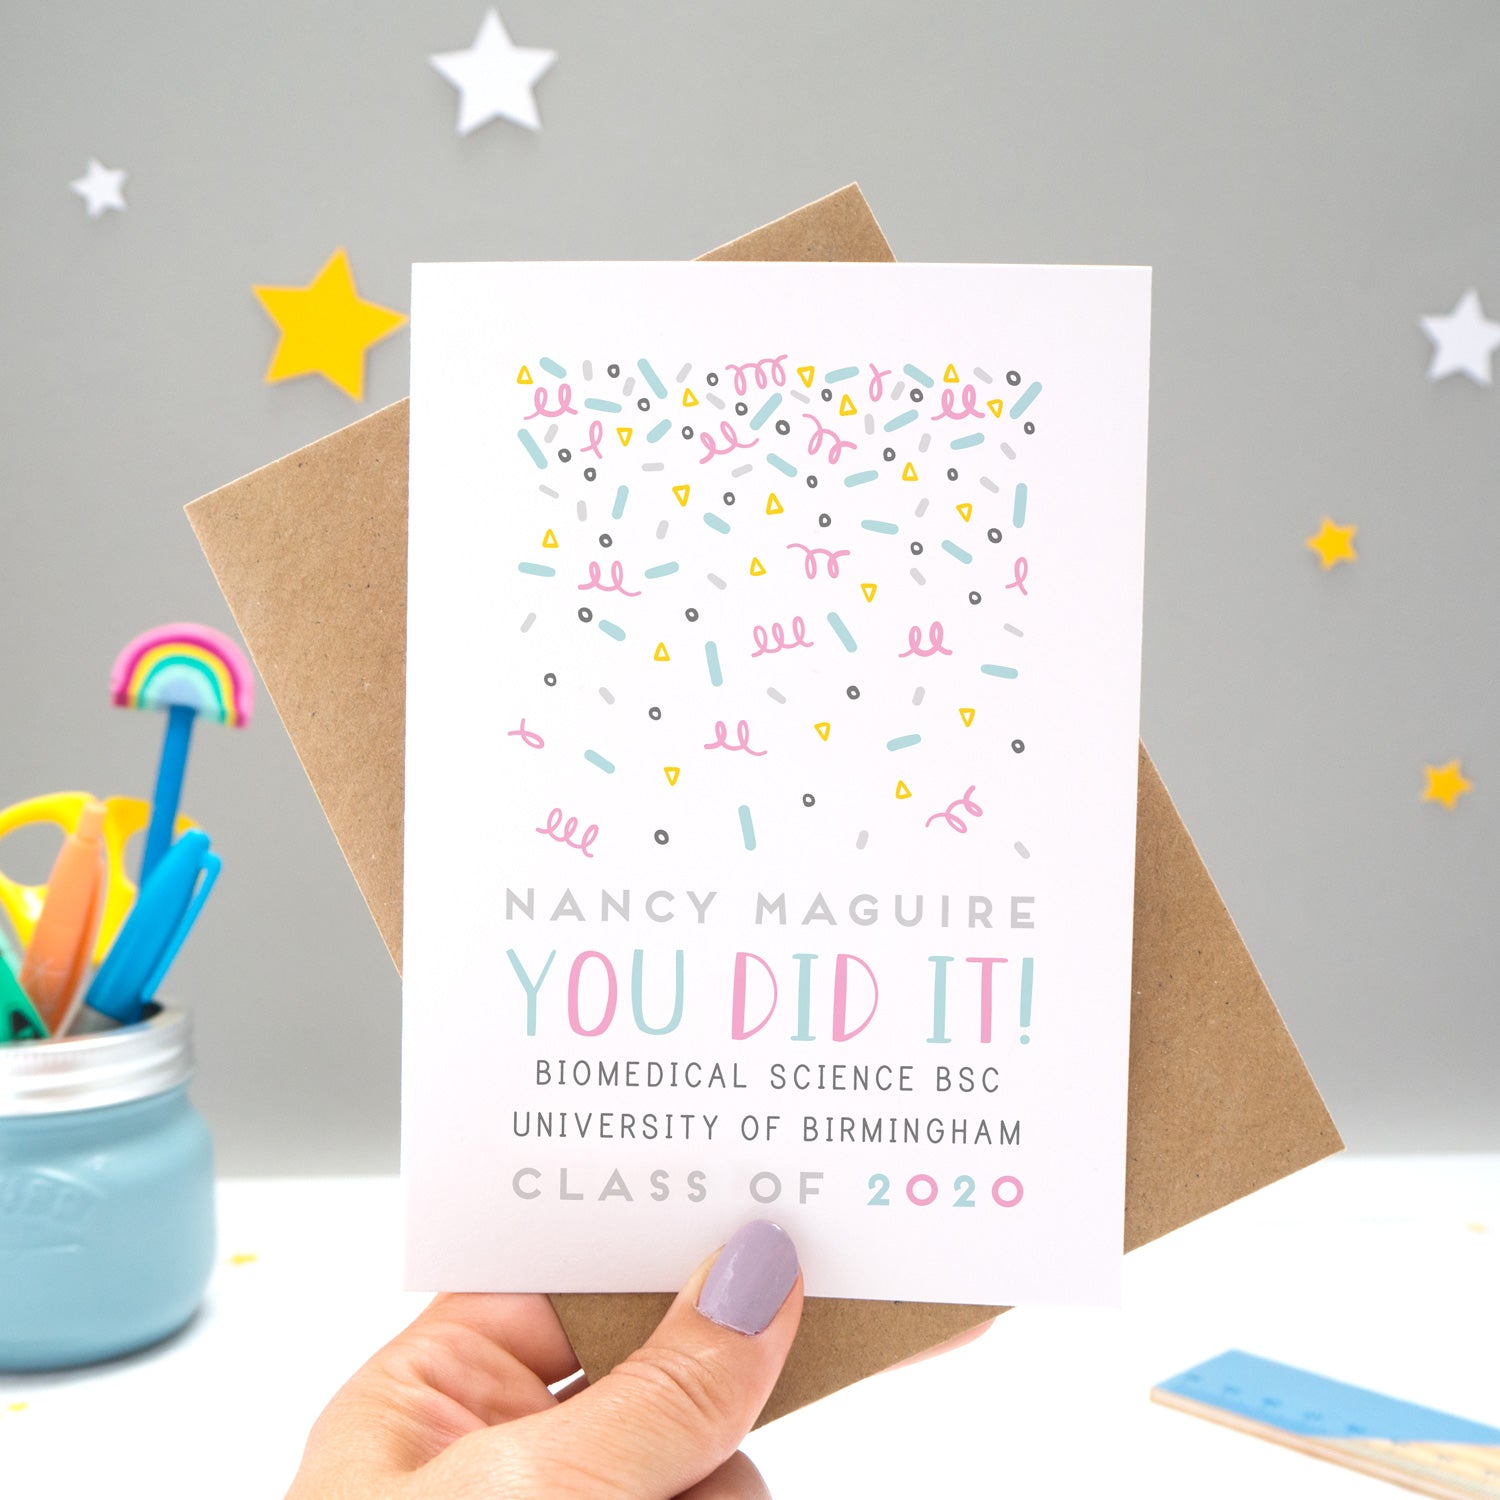 A personalised graduation card designed and made by Joanne Hawker in her somerset studio being held against a kraft brown envelope over a grey background with yellow and white stars. The confetti illustration and text is in varying tones of grey, blue and pink.